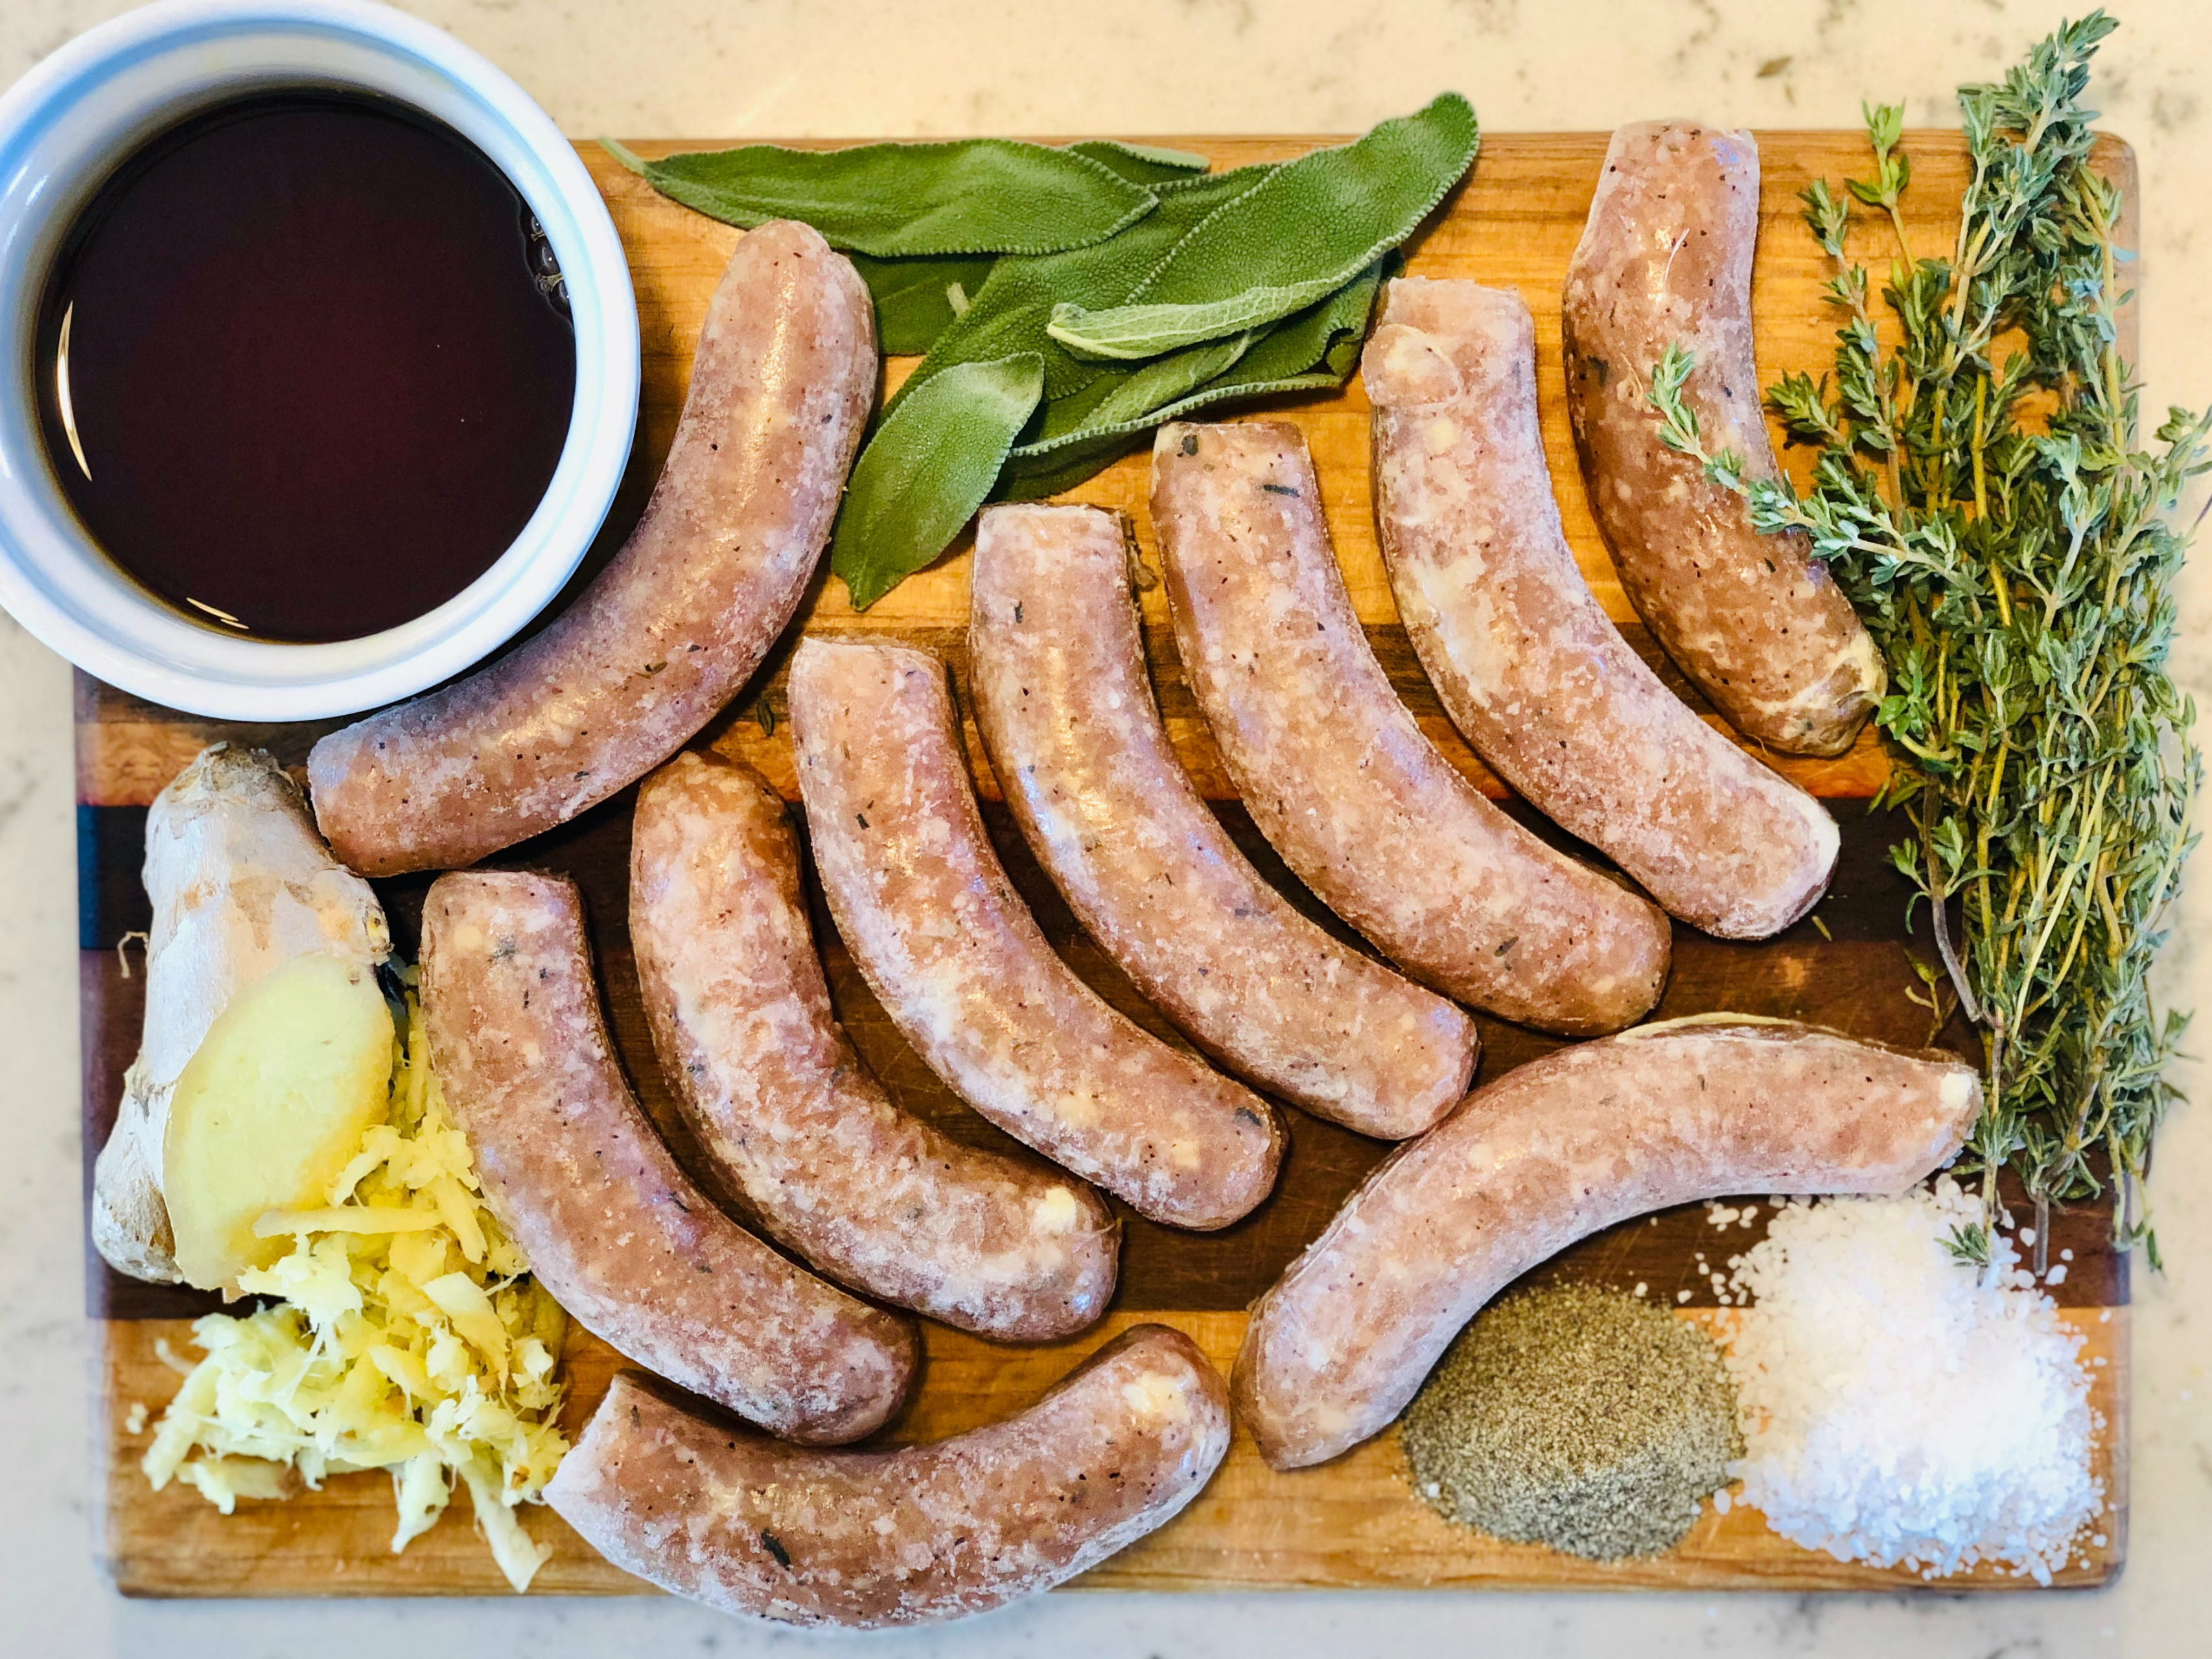 Pork Sausage Breakfast Links With Maple Syrup Tea Hills Farms